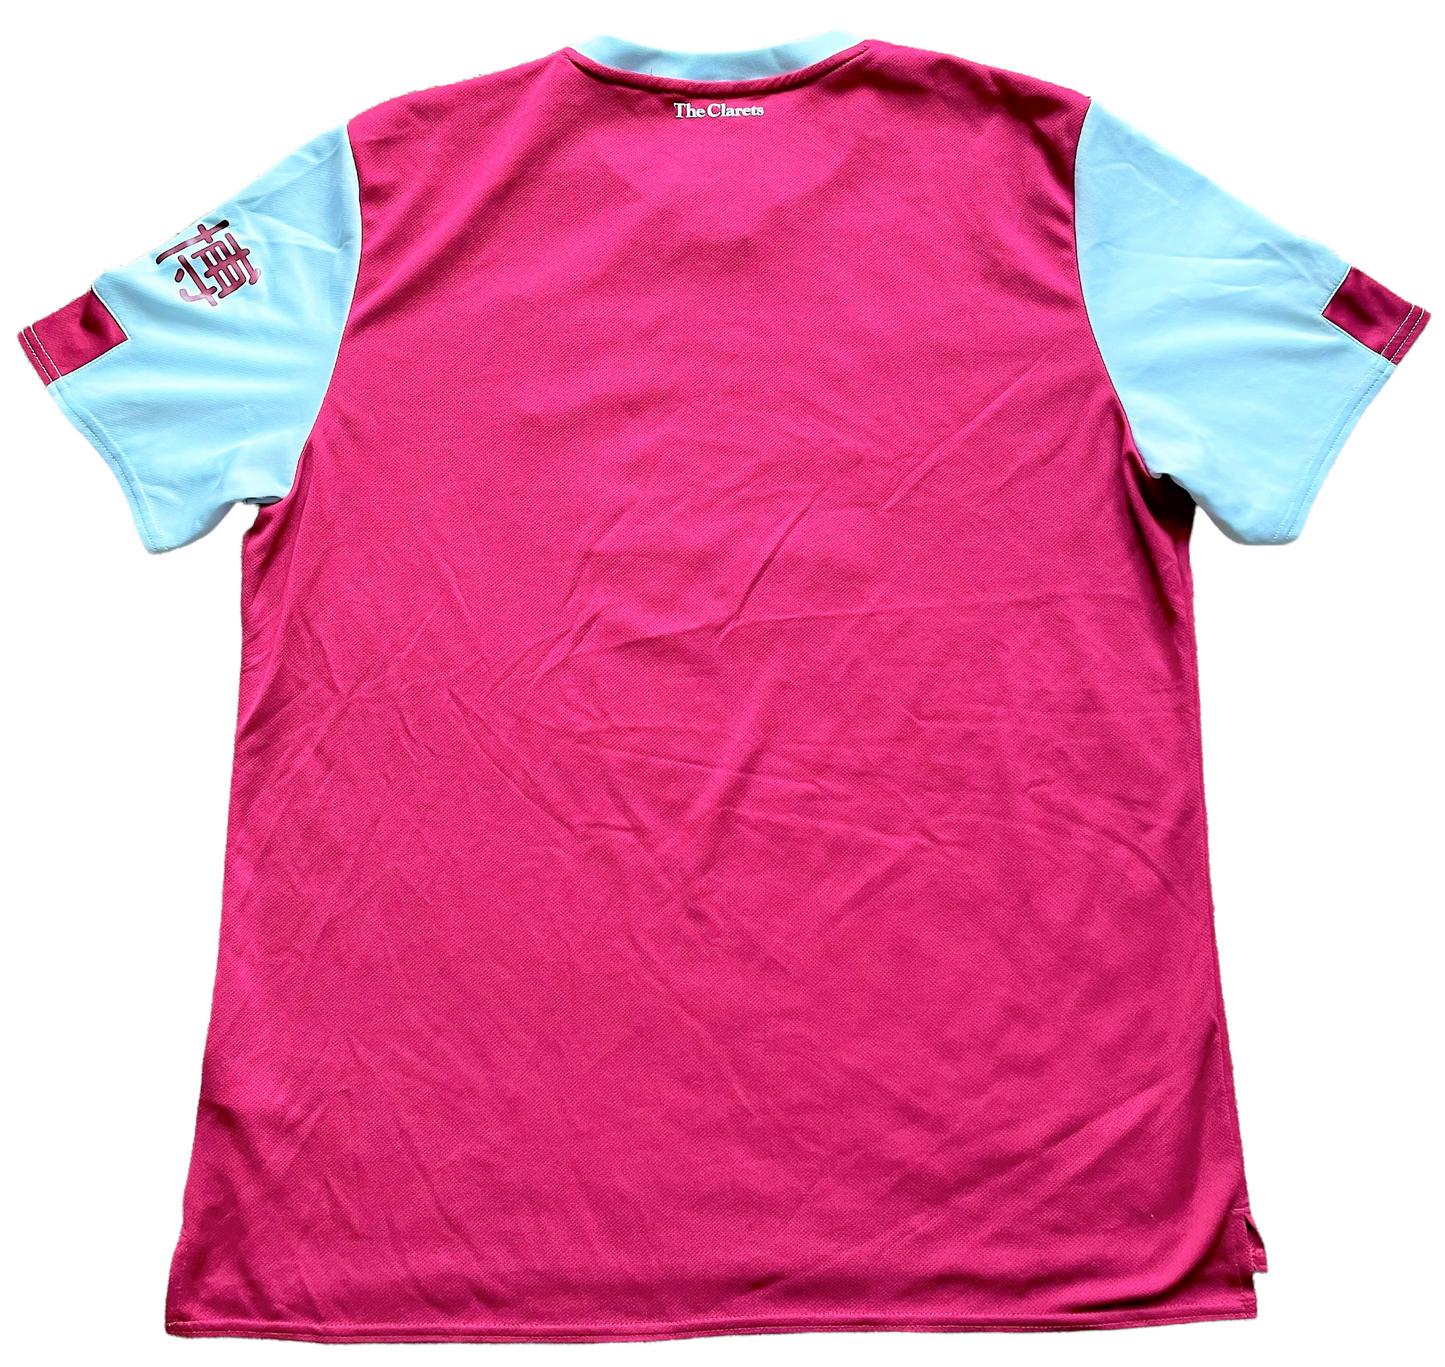 Burnley Home Shirt 2019 (excellent) Adults Large. Height 24 inches